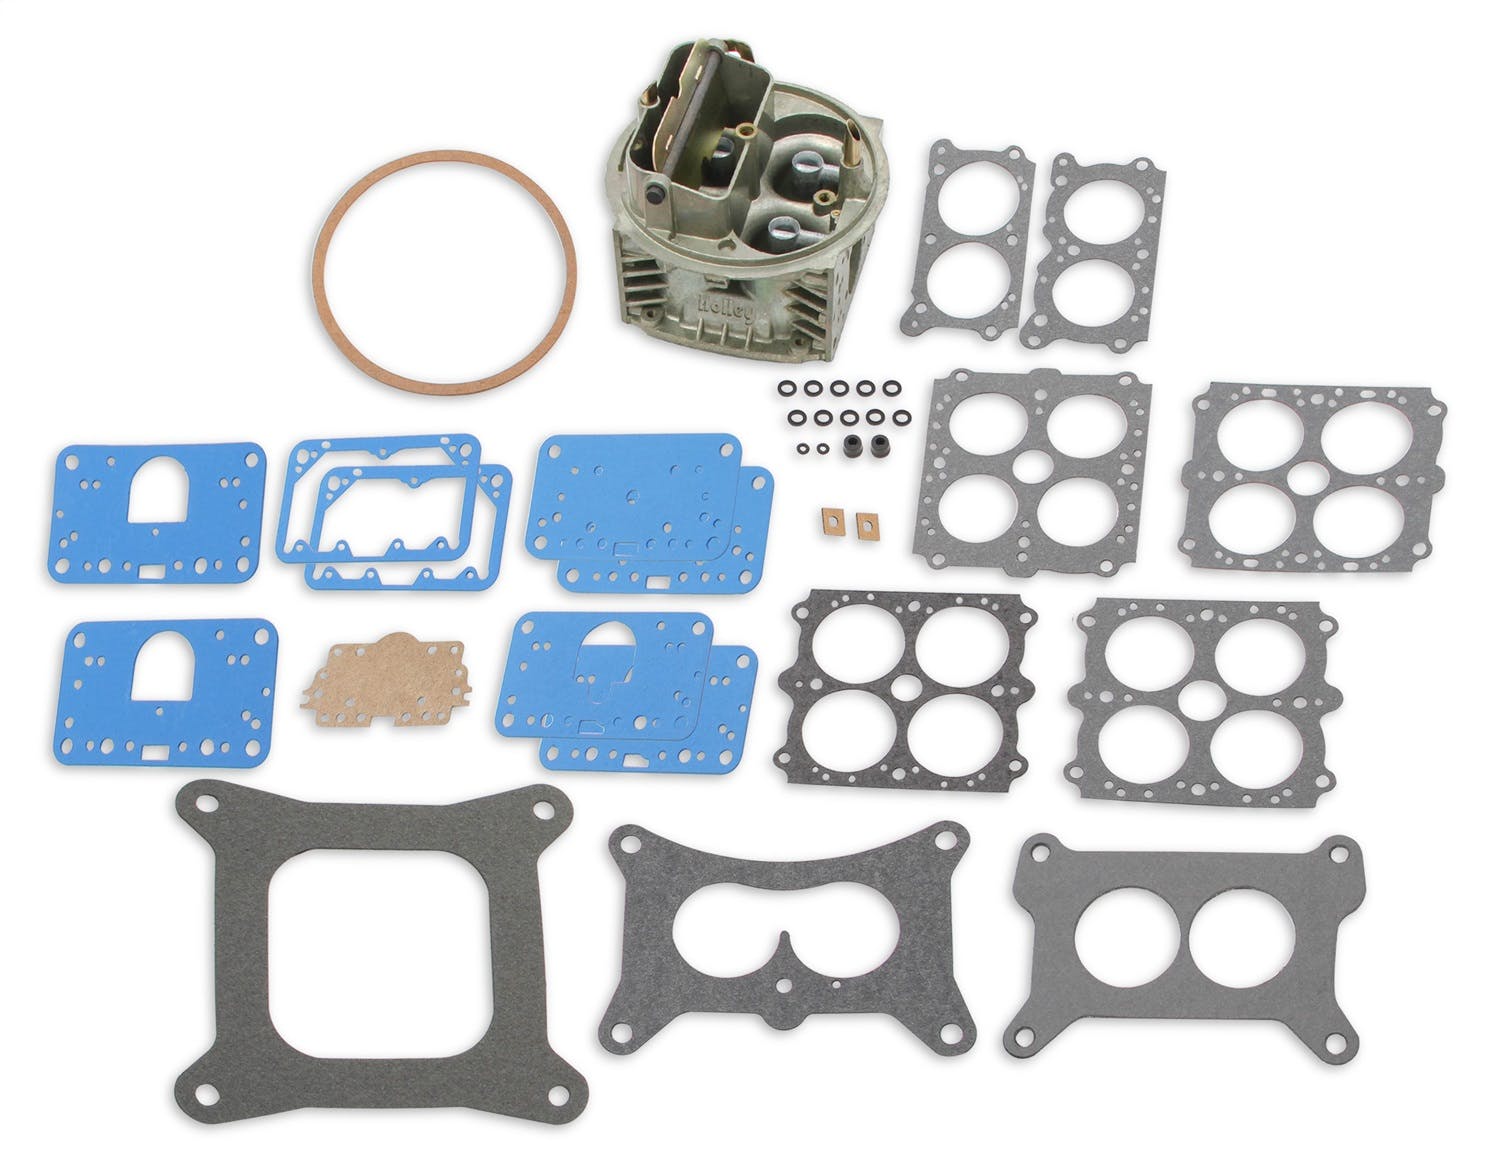 Holley 134-358 REPLACEMENT MAIN BODY KIT FOR 0-3310C